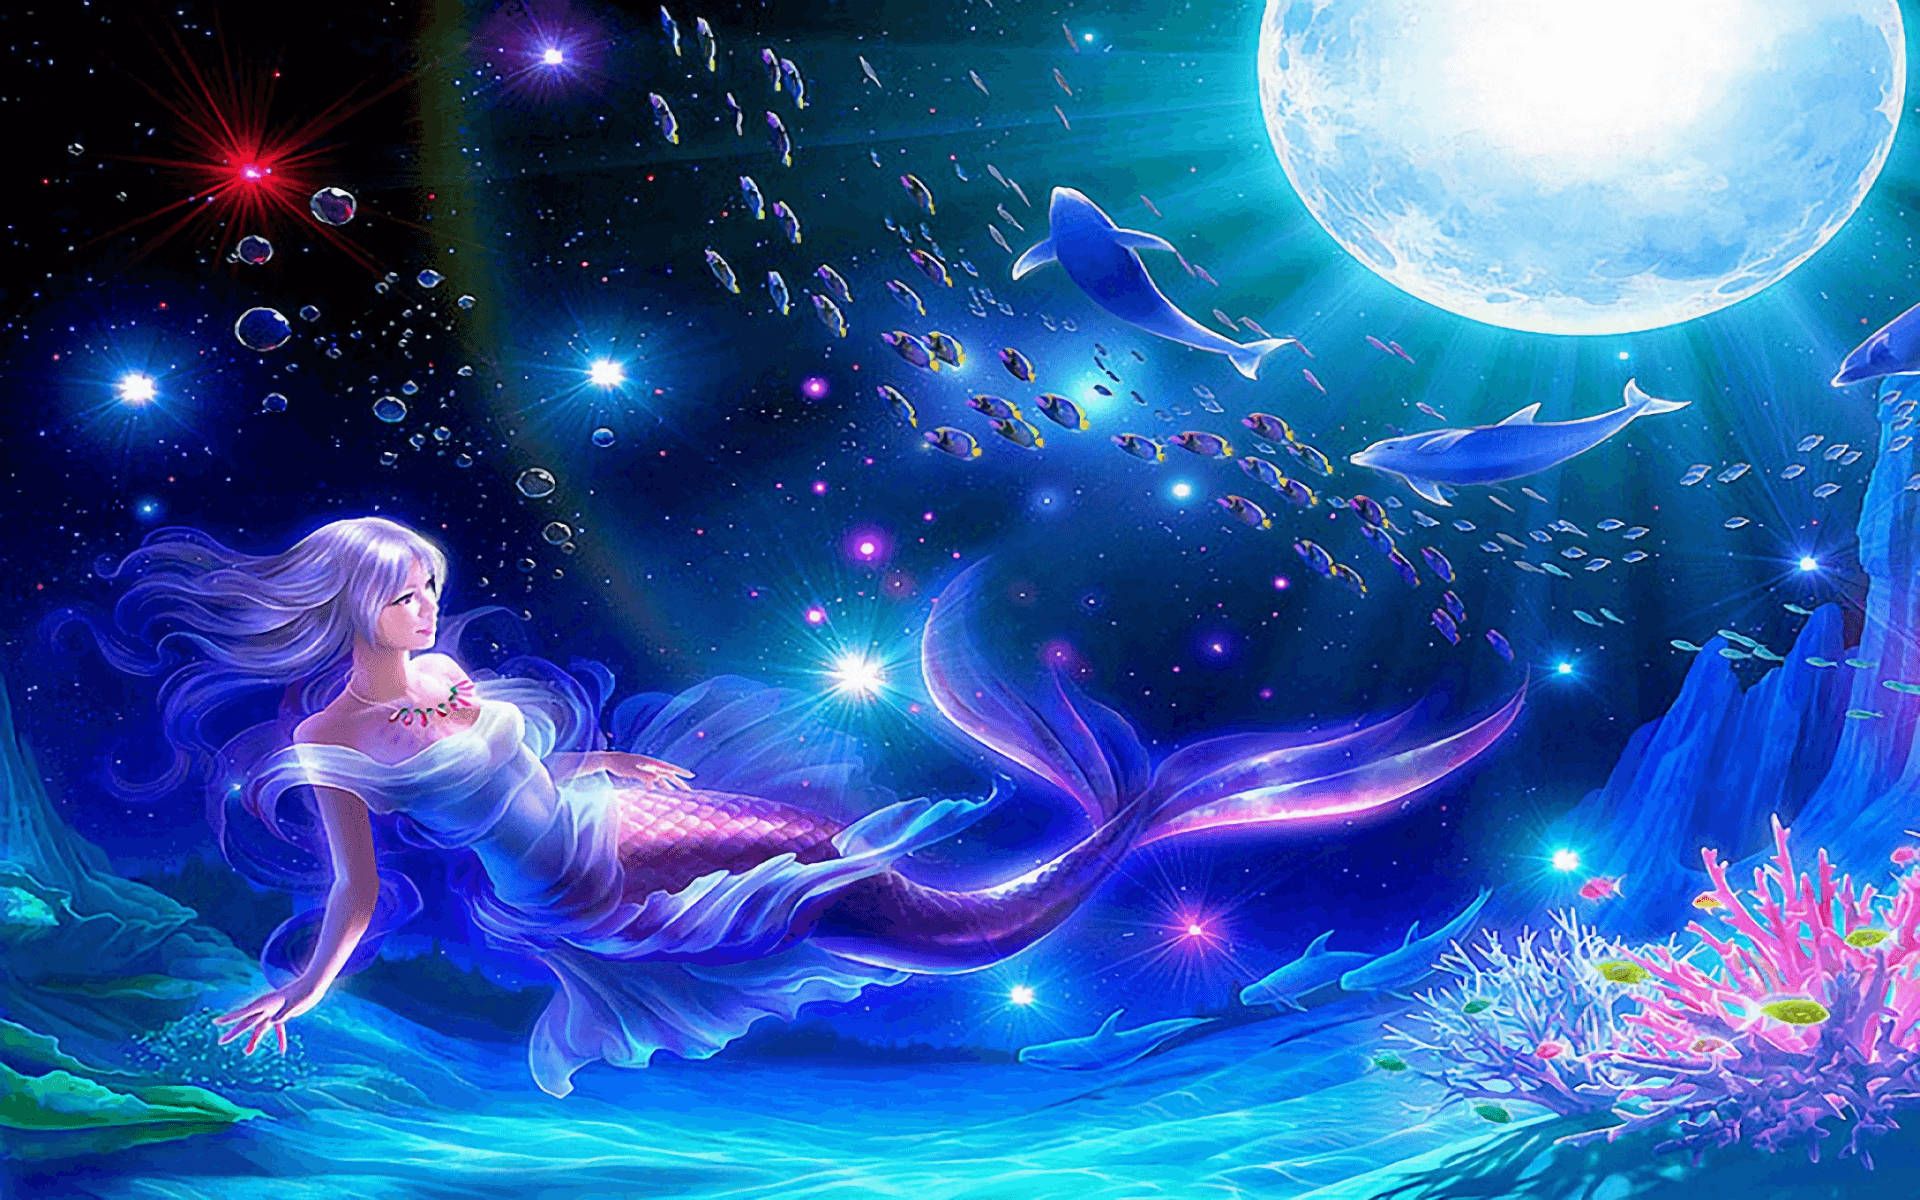 A mermaid with purple hair and a blue tail swims in the ocean. - Mermaid